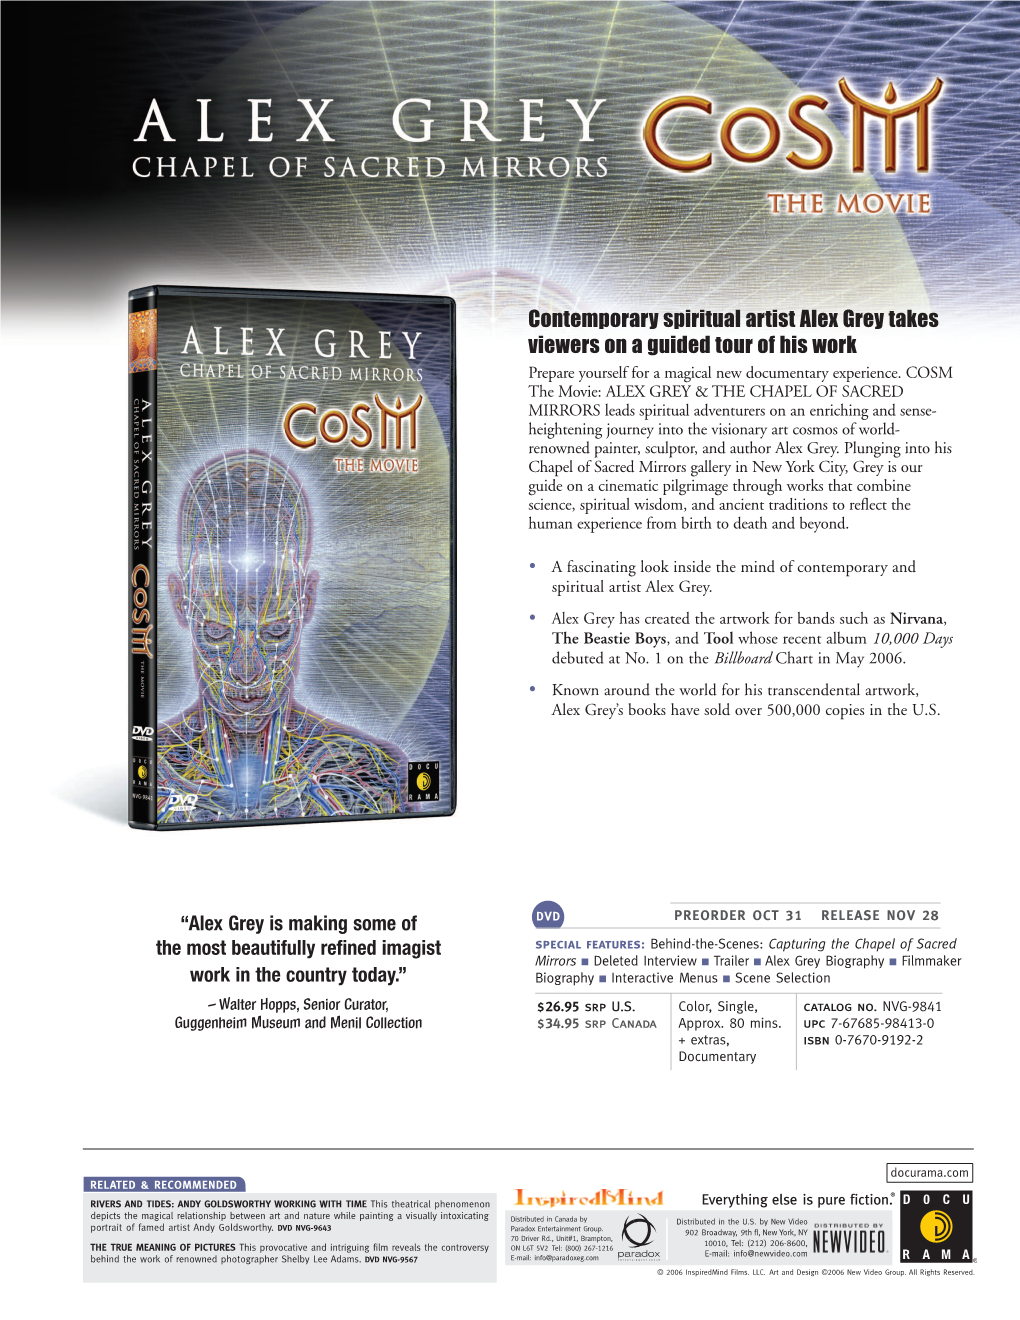 Contemporary Spiritual Artist Alex Grey Takes Viewers on a Guided Tour of His Work Prepare Yourself for a Magical New Documentary Experience